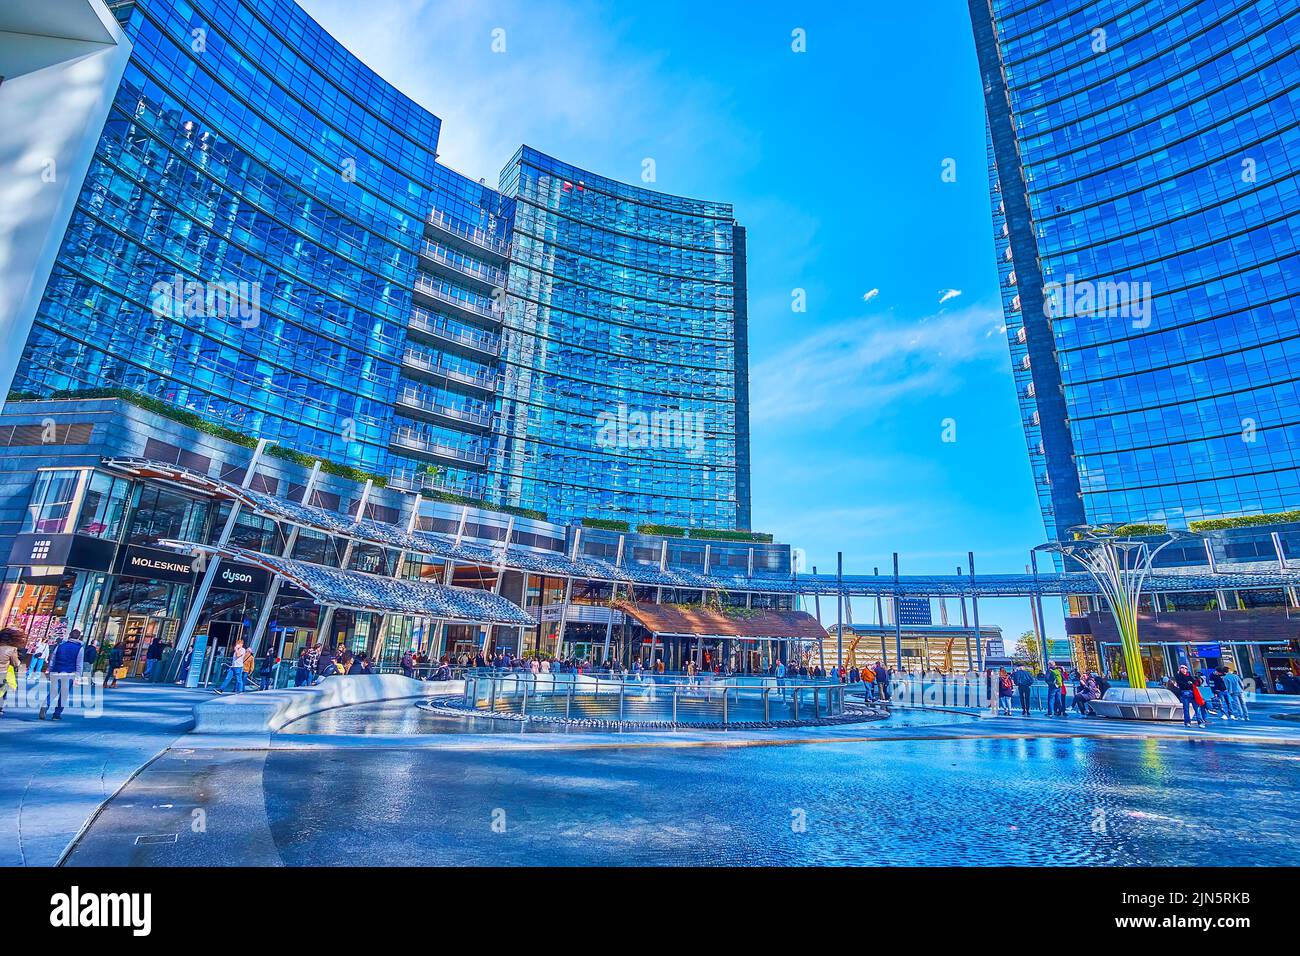 MILAN, ITALY - APRIL 9, 2022: Modern Piazza Gae Aulenti with its large pool is the most photogenic place for shopping and leisure strolls outside city Stock Photo